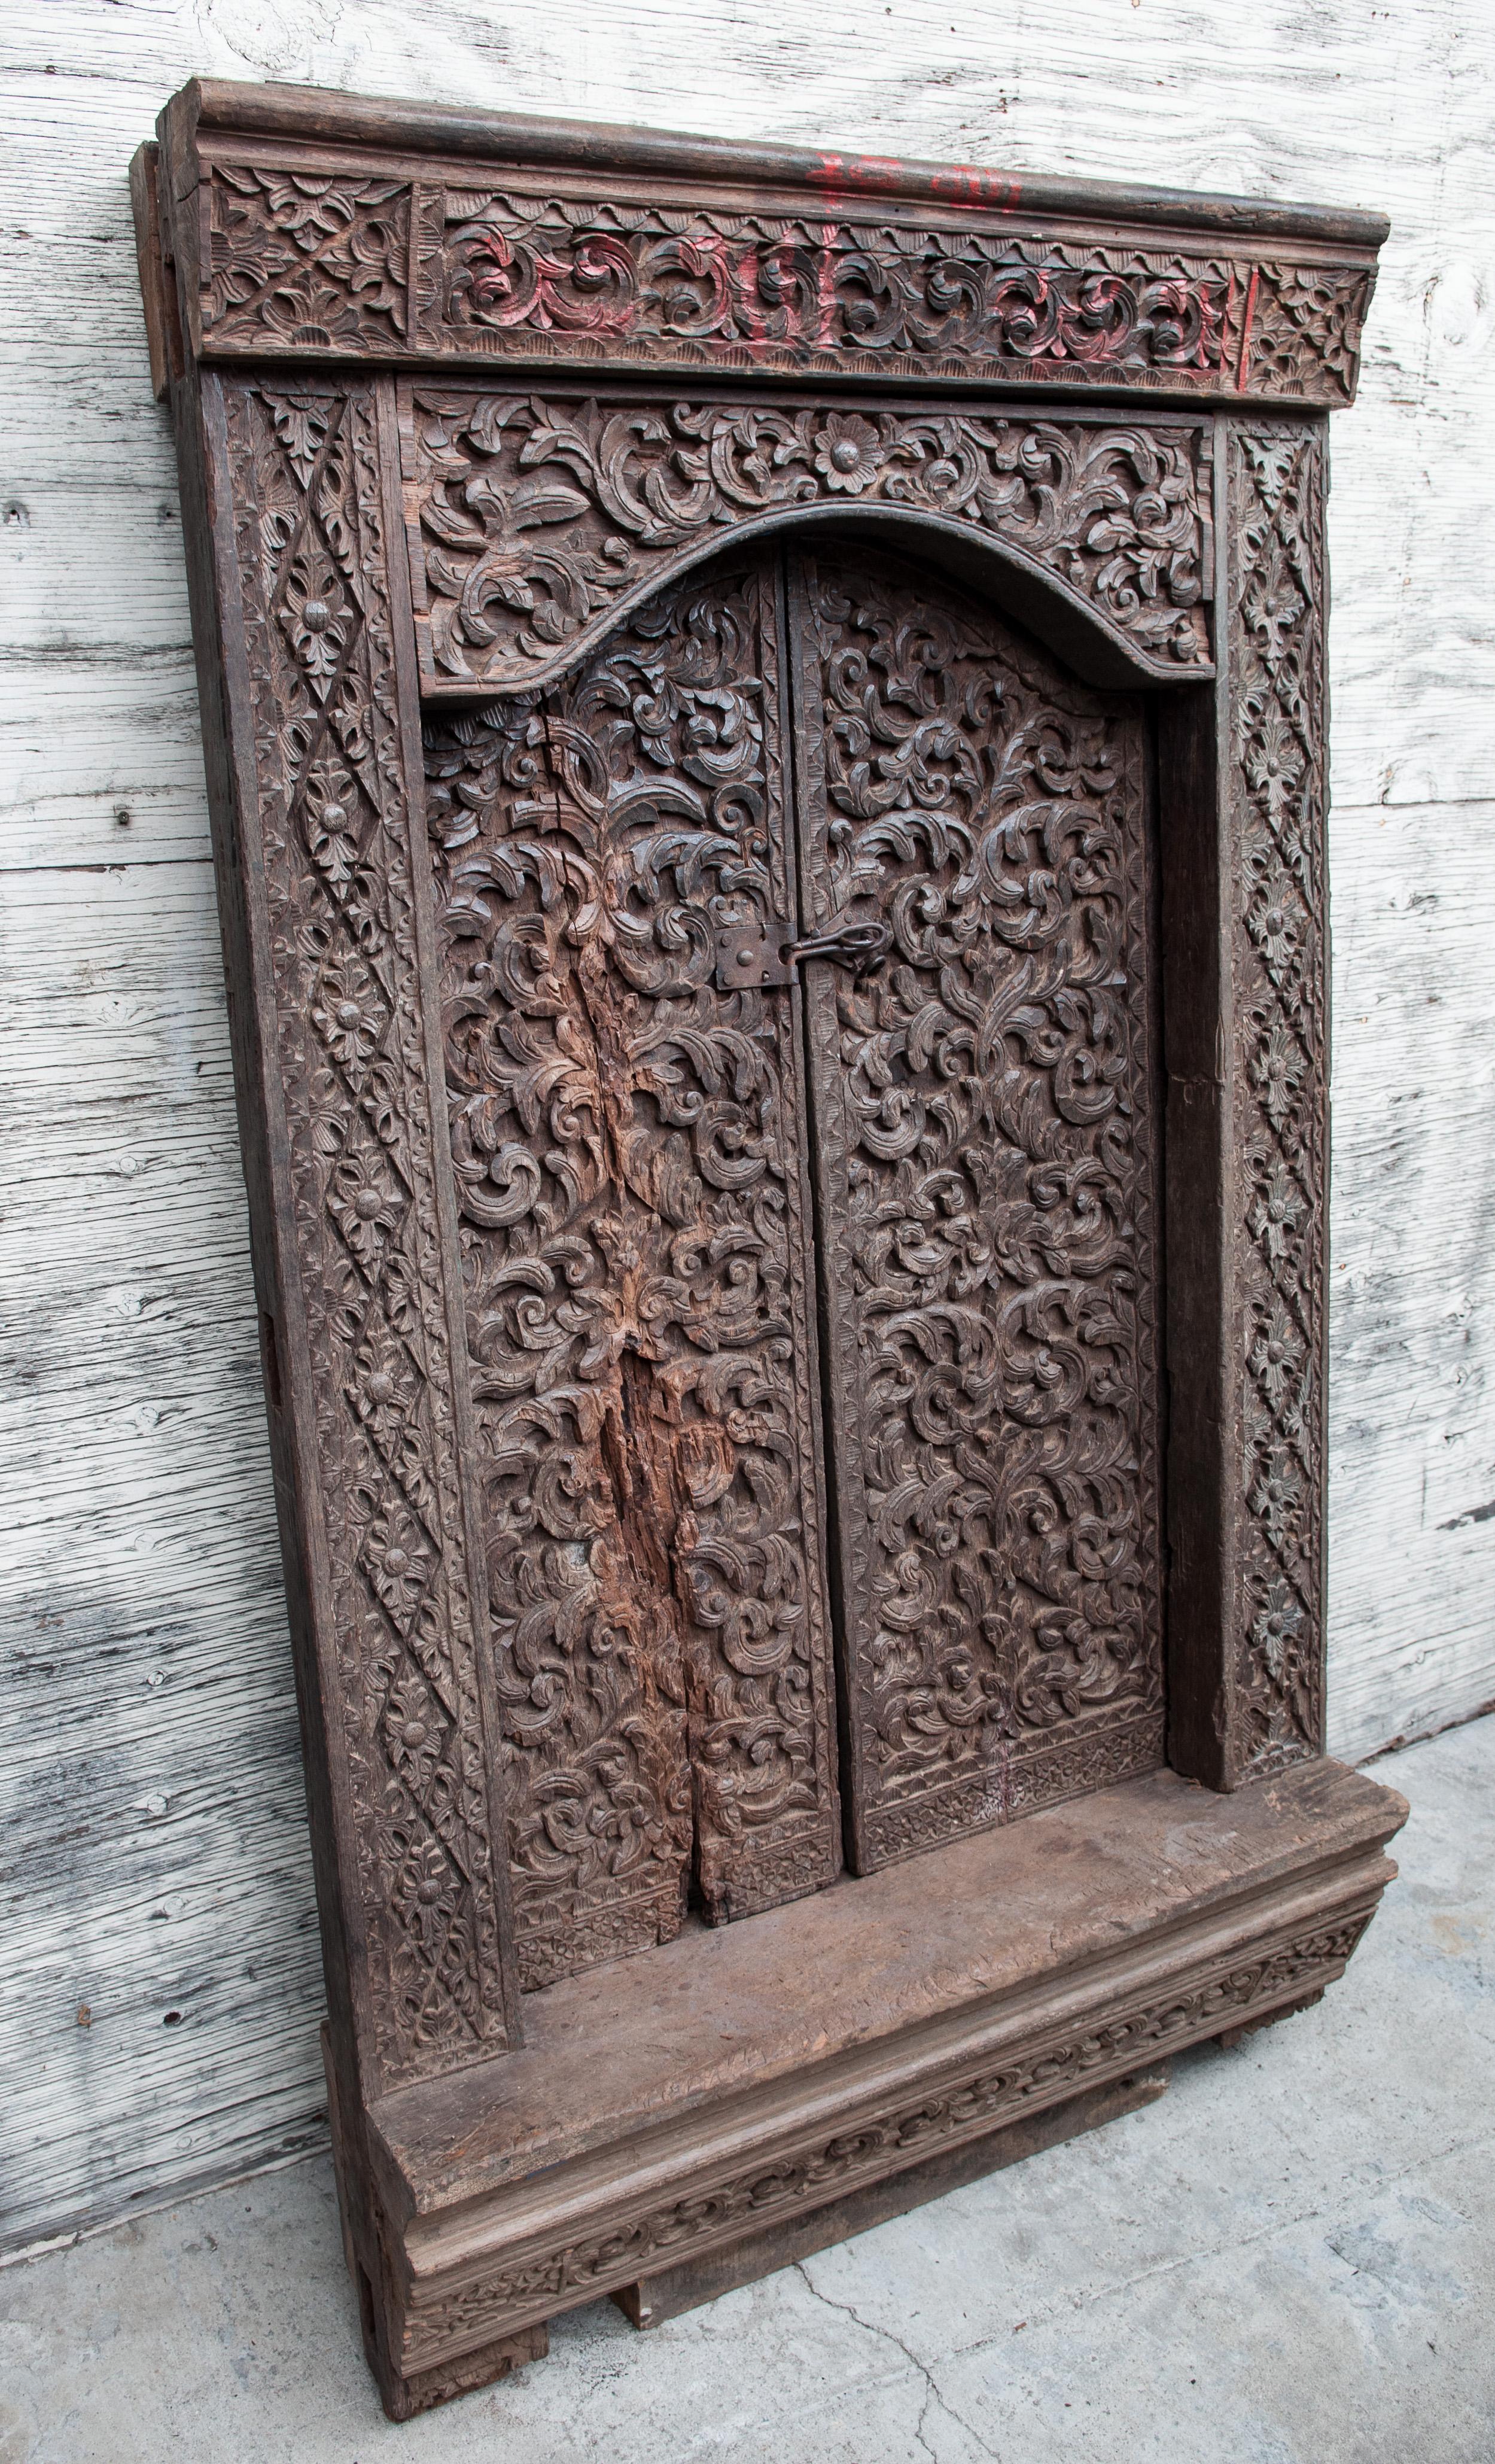 Hand-Carved Old Carved Door and Frame from Sumatra, Merbau Wood, Early to Mid-20th Century. 